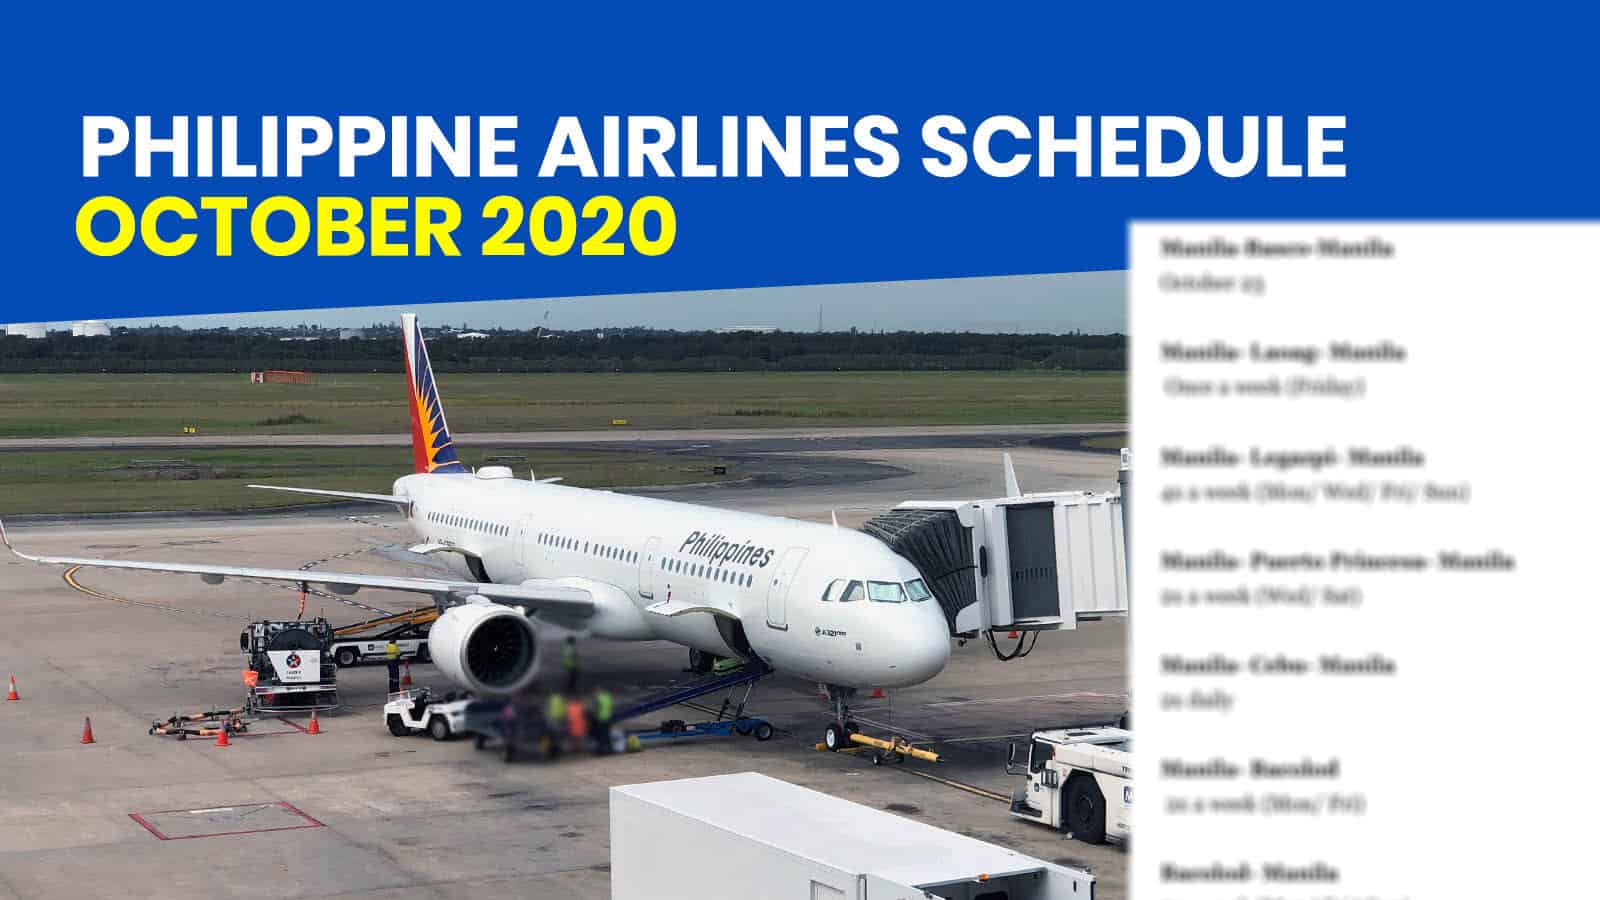 PHILIPPINE AIRLINES: Schedule of Operational Flights for OCTOBER 2020